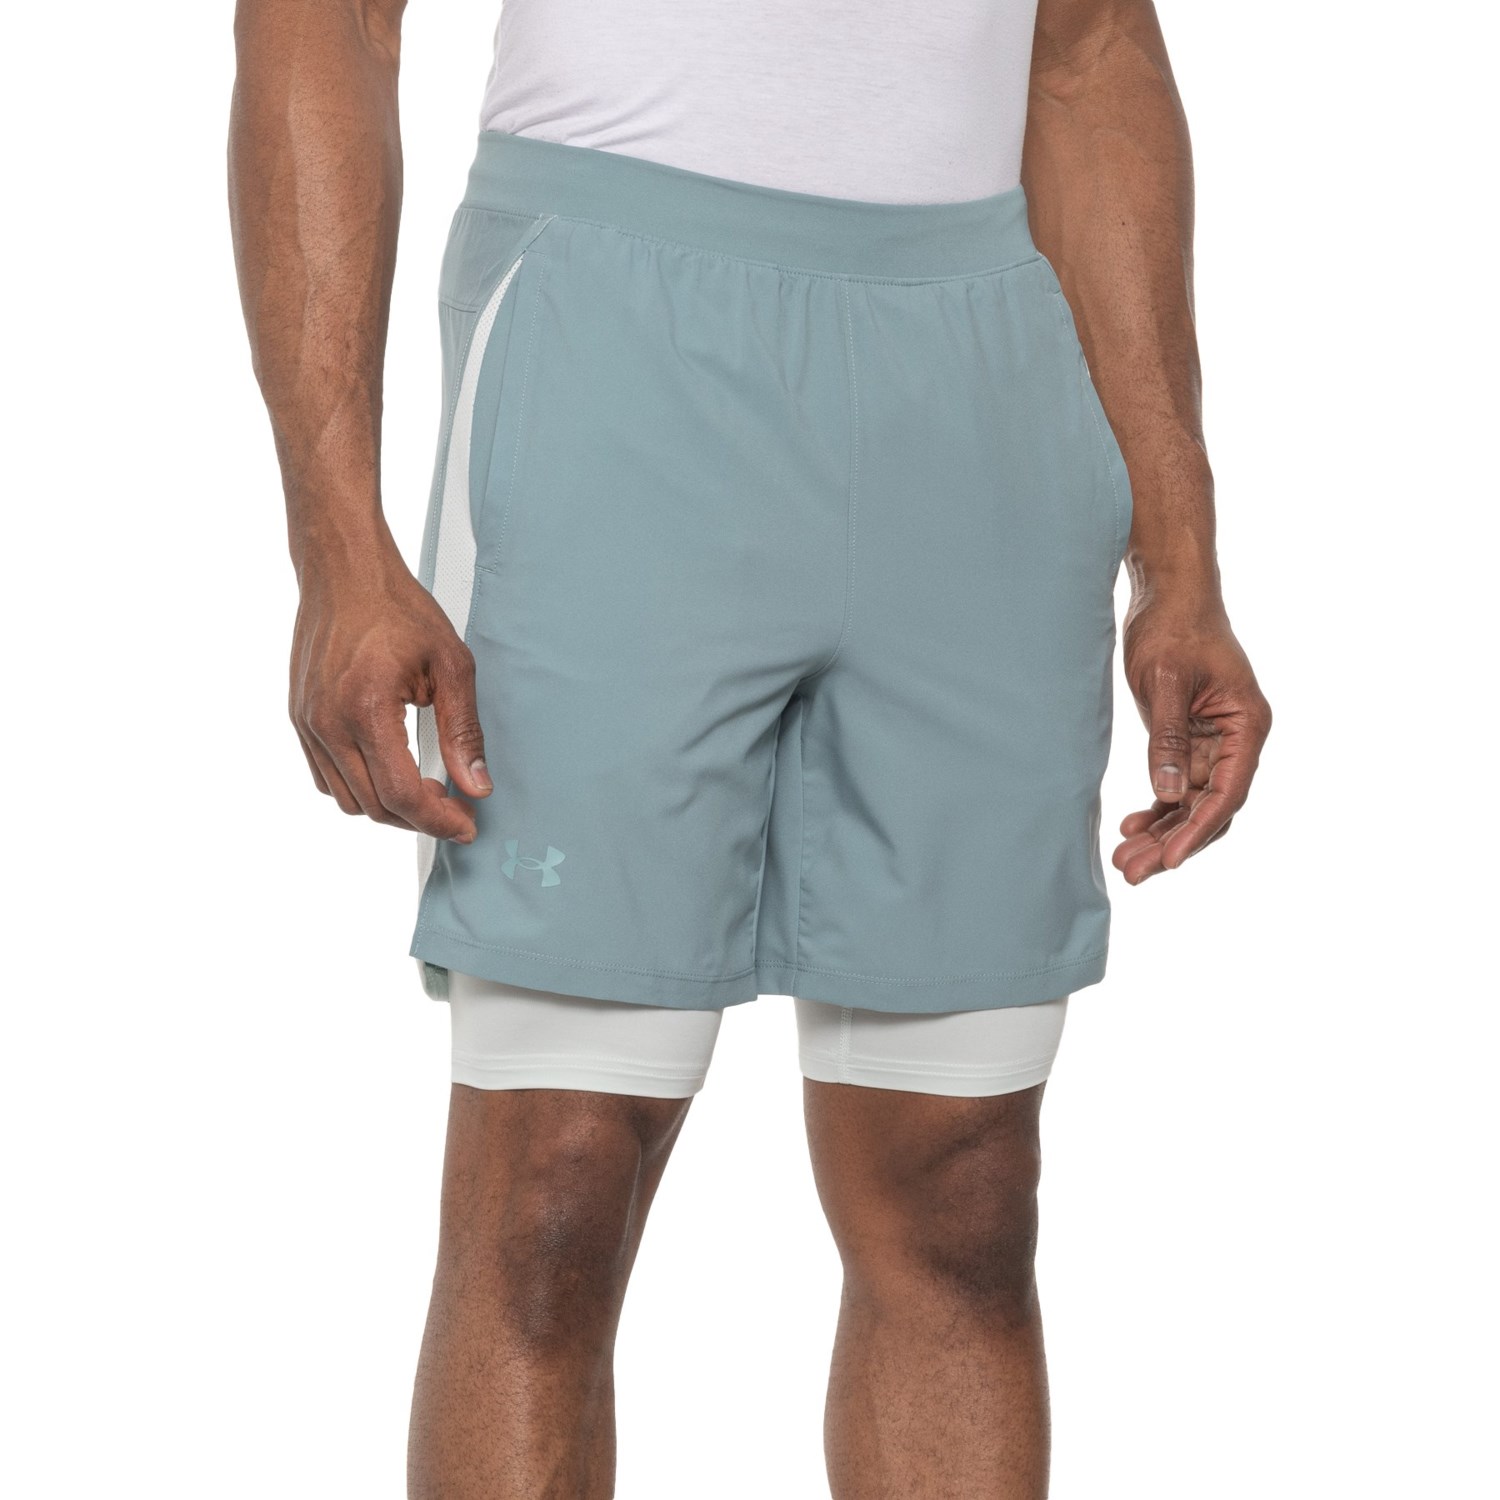 Under Armour Launch Running Shorts - Built-In Liner, 7” (For Men)